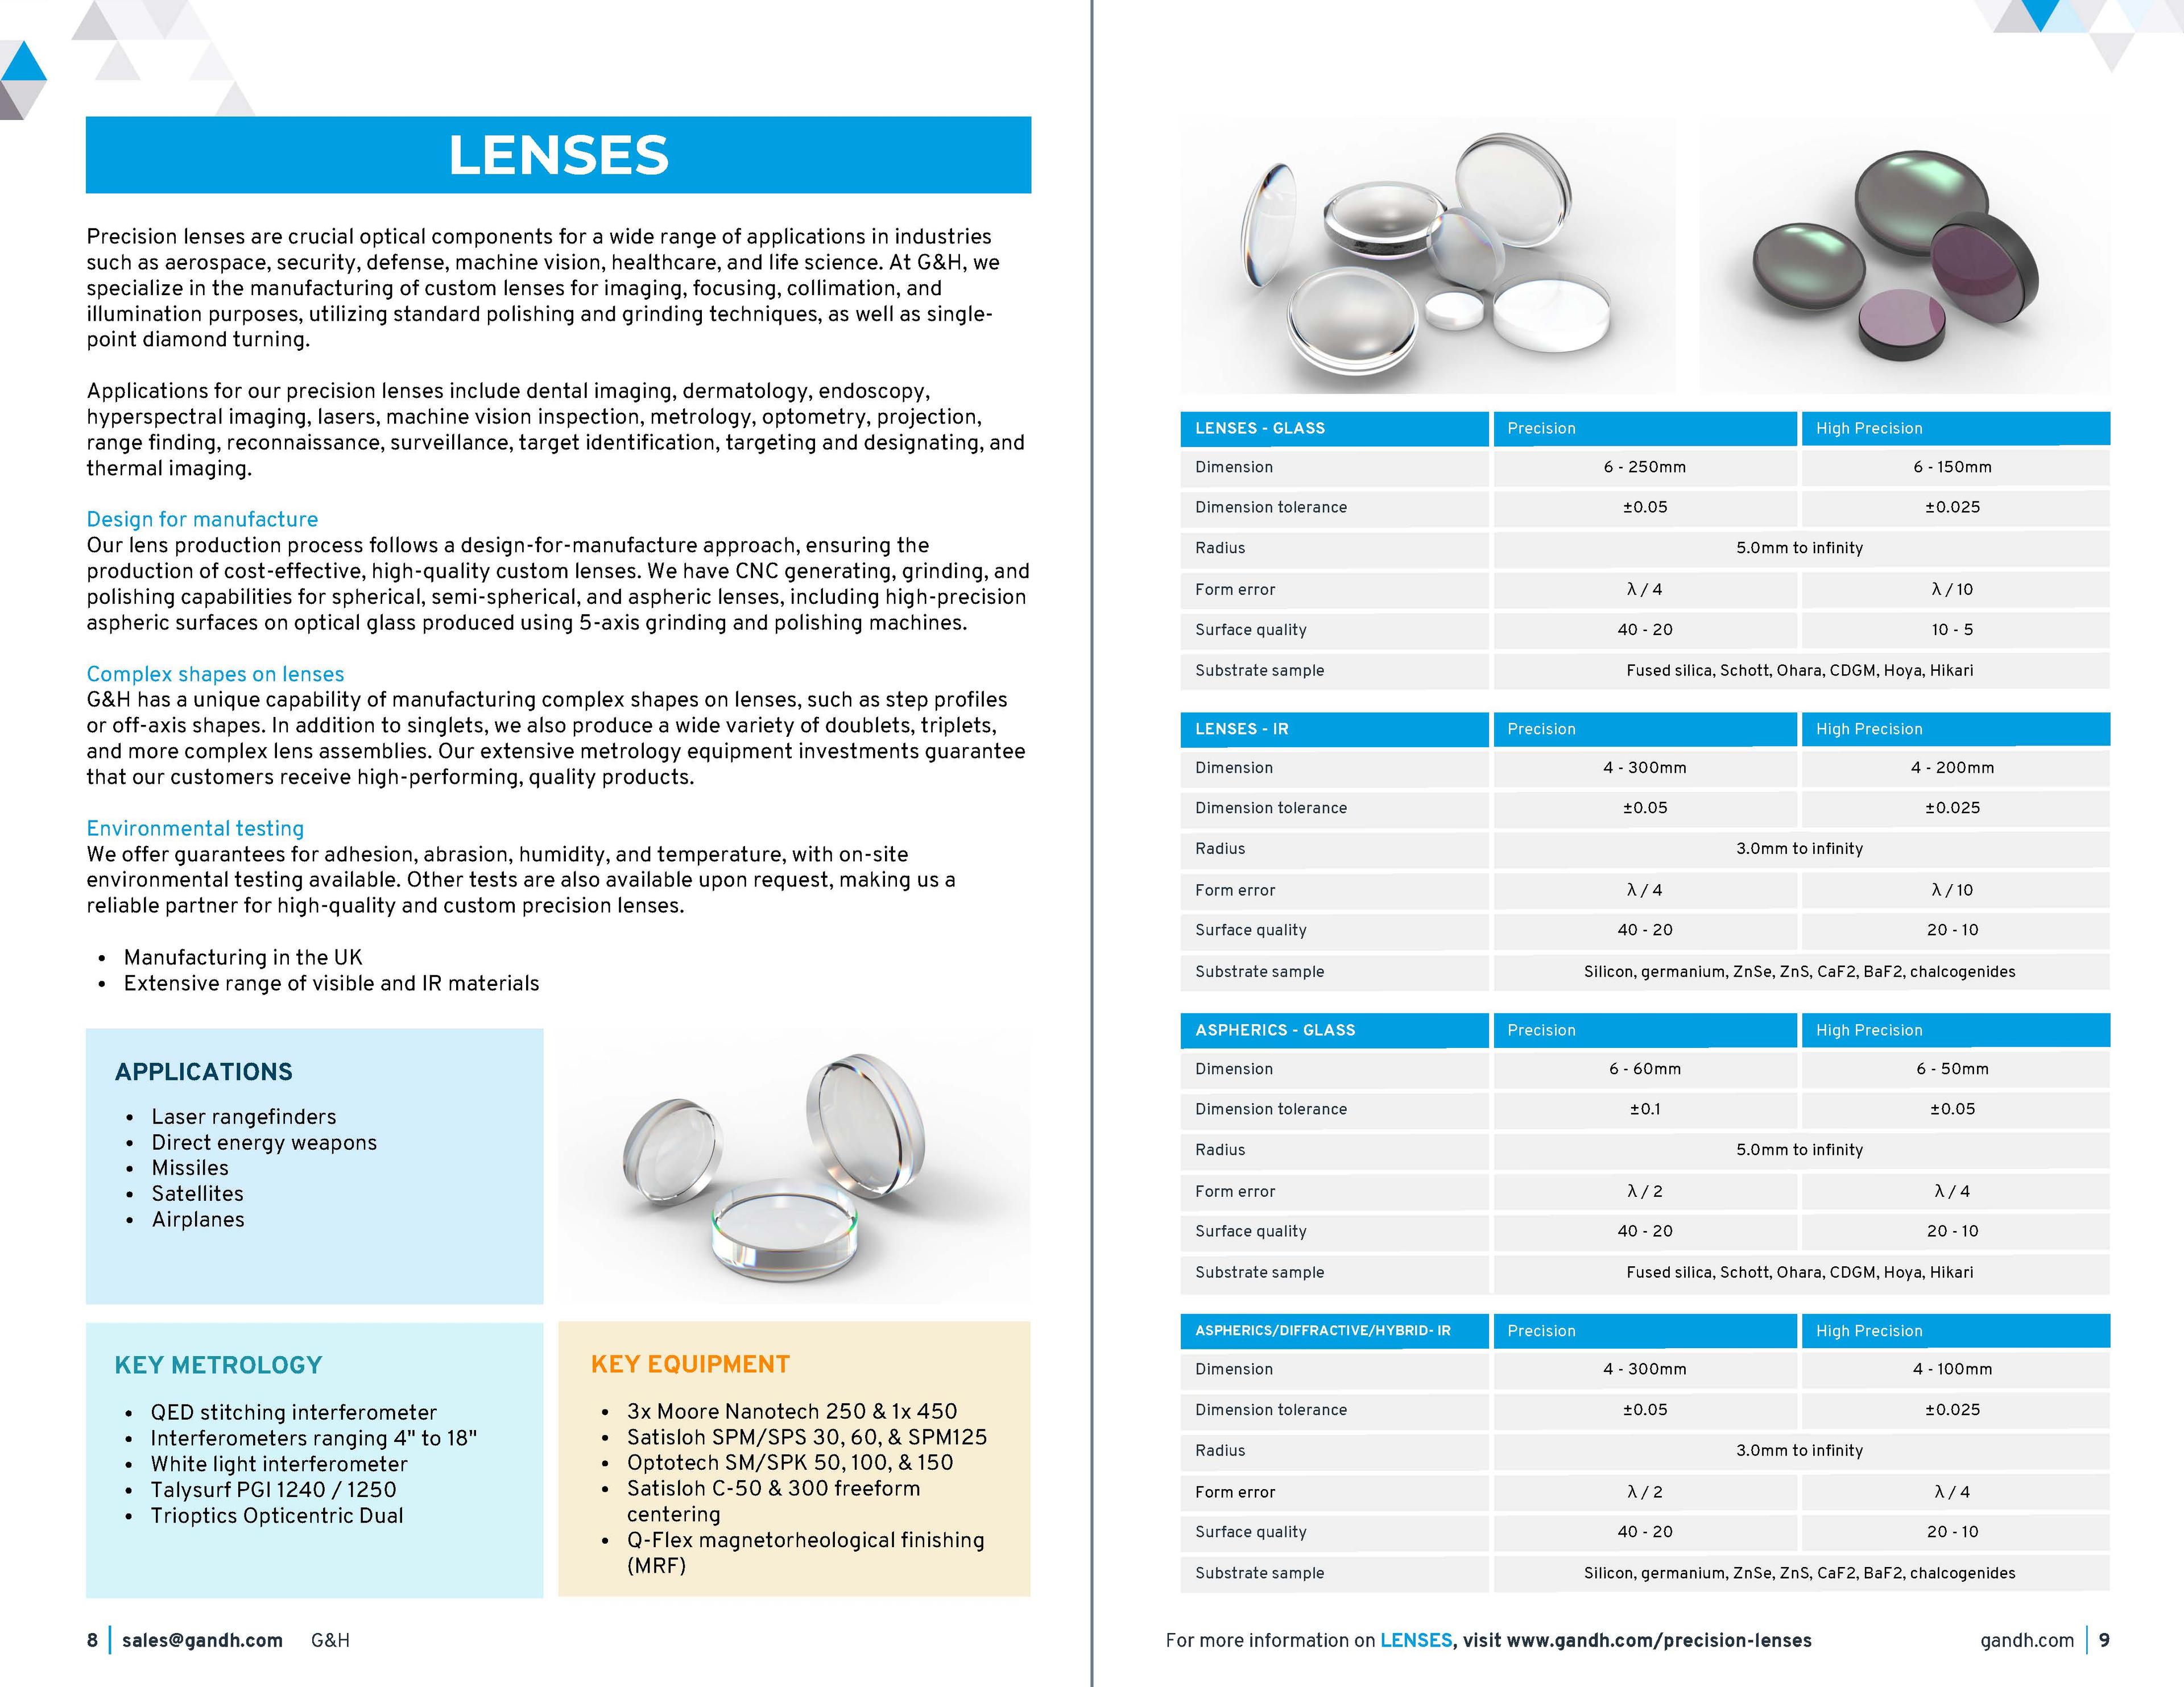 G&H Product & Solutions Guide - Precision Optics Page 08-09